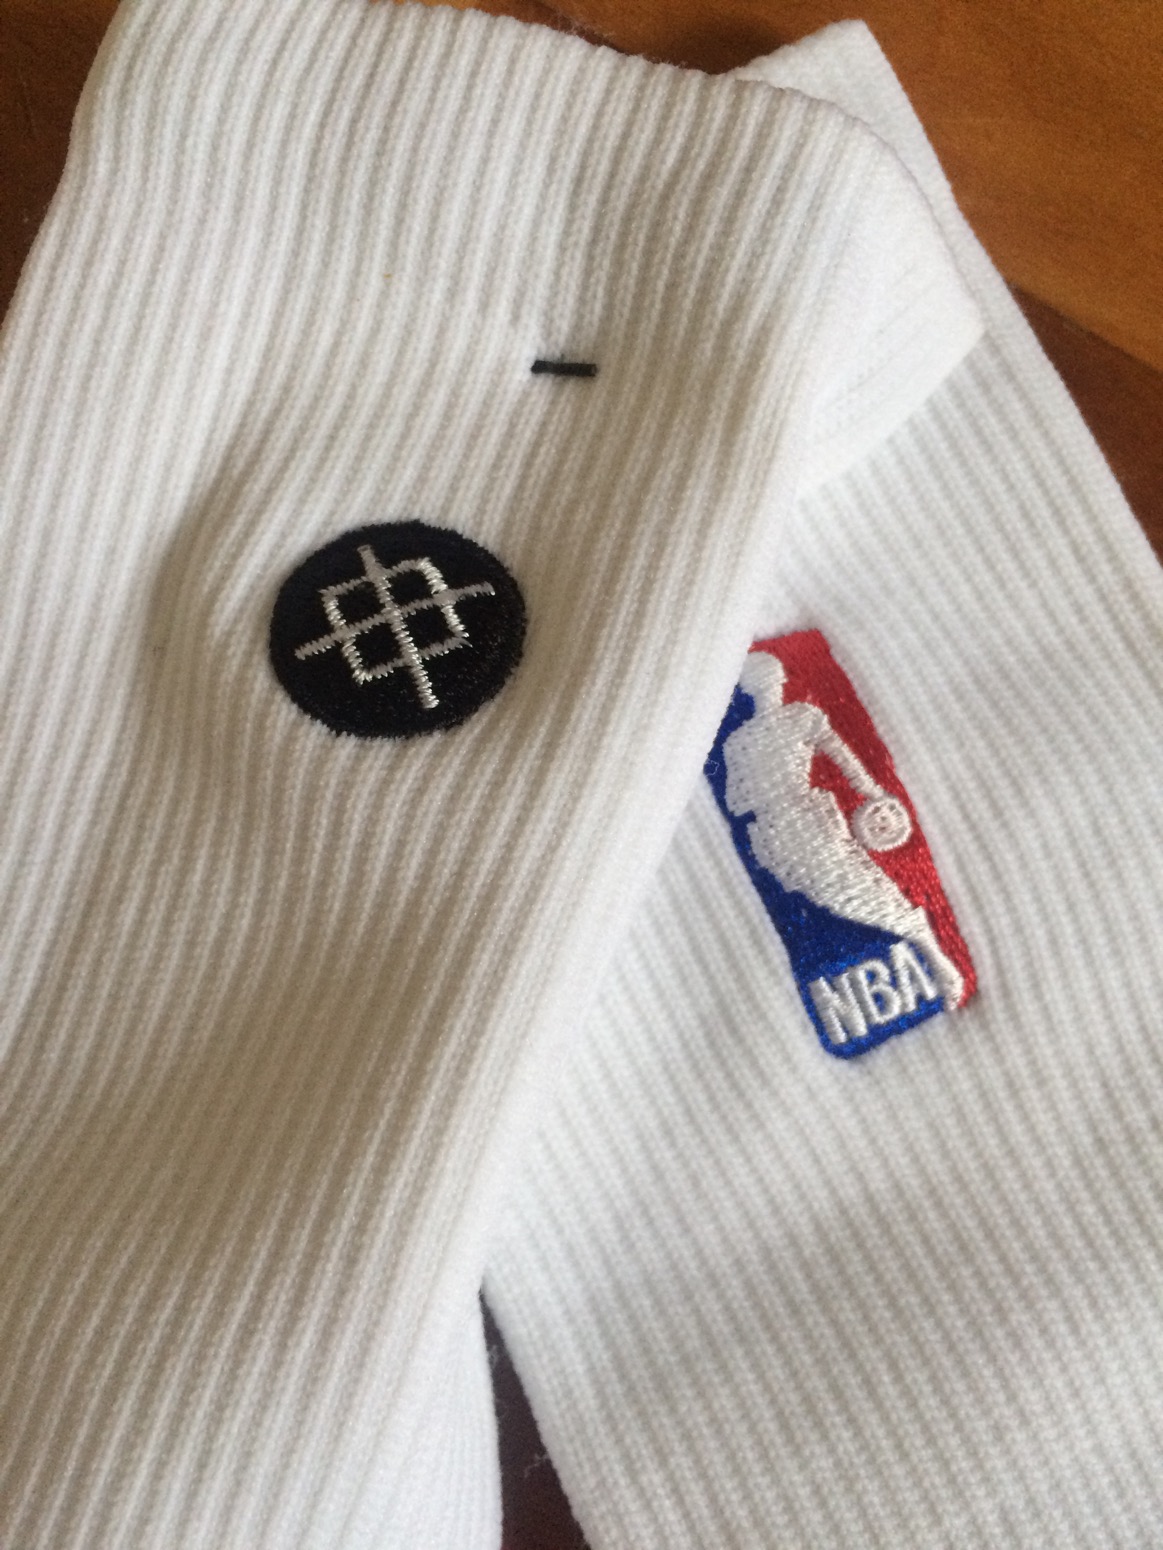 First Look: Official NBA Logo Socks by Stance | schwollo.com1163 x 1550